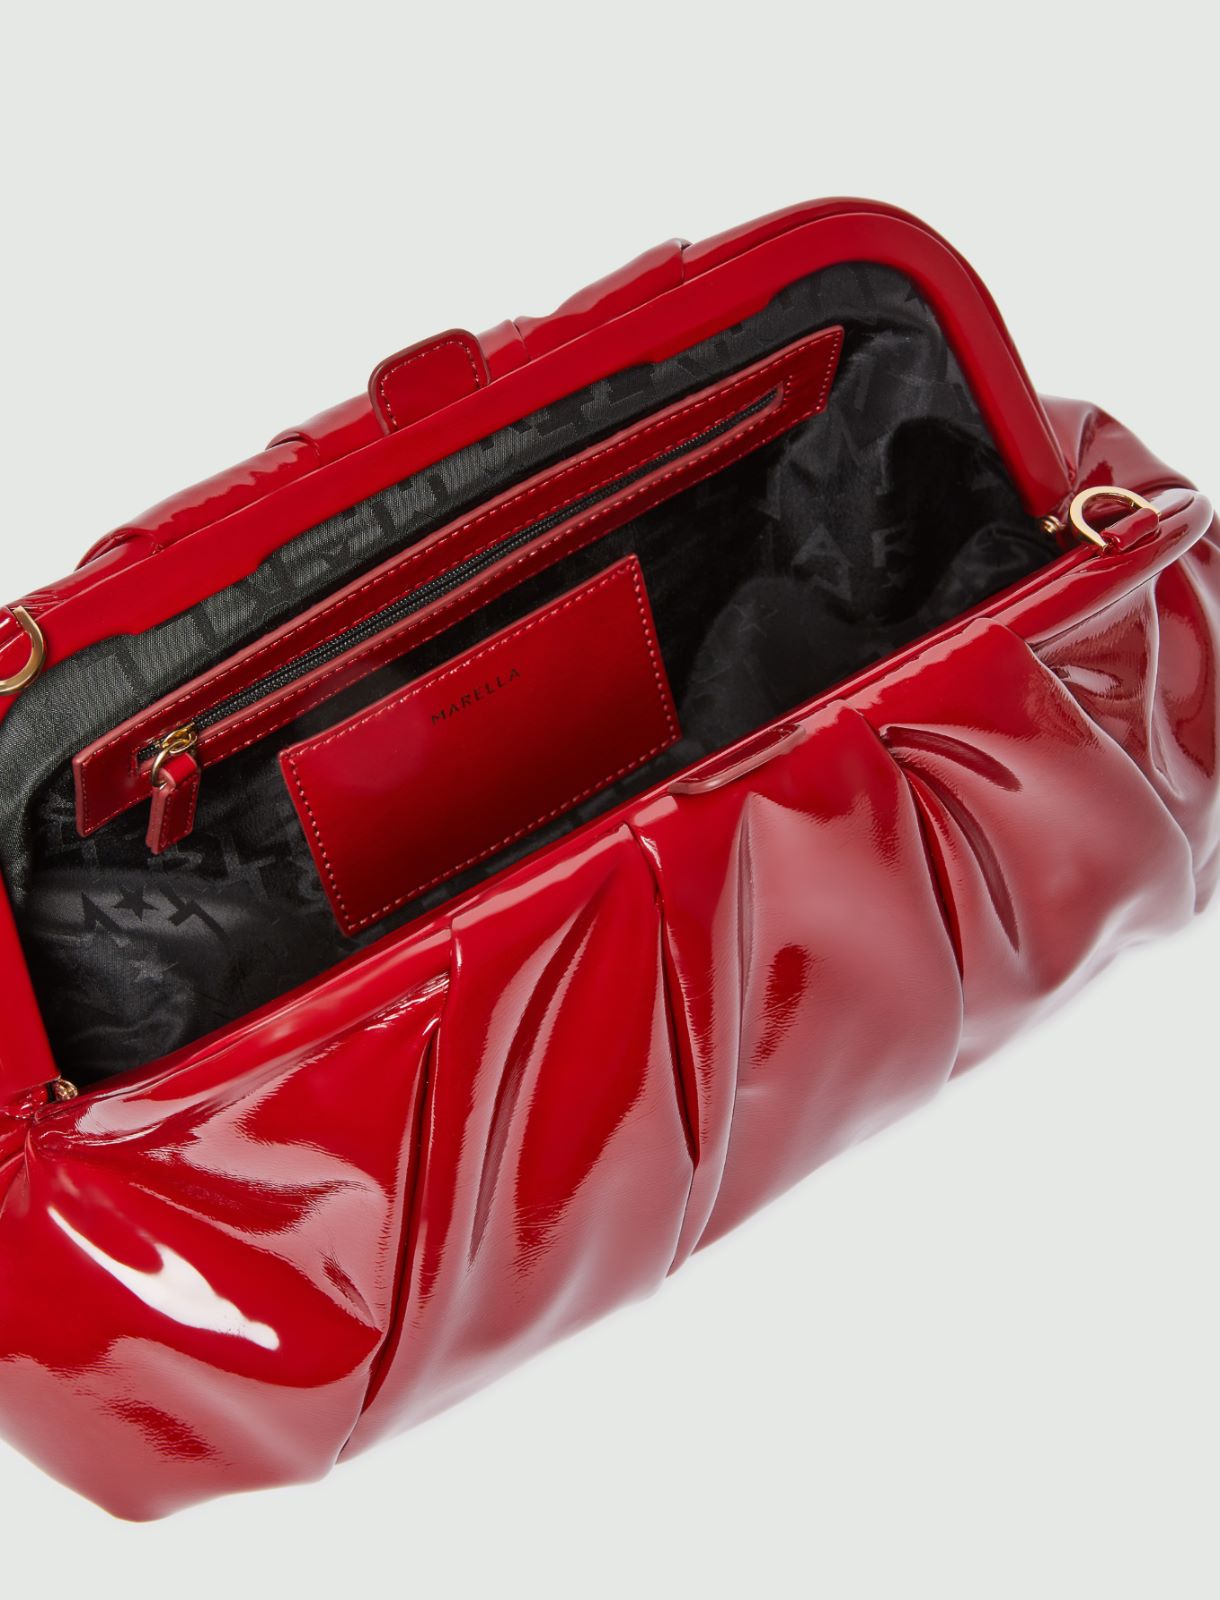 Patent leather bag - Red - Marella - 5